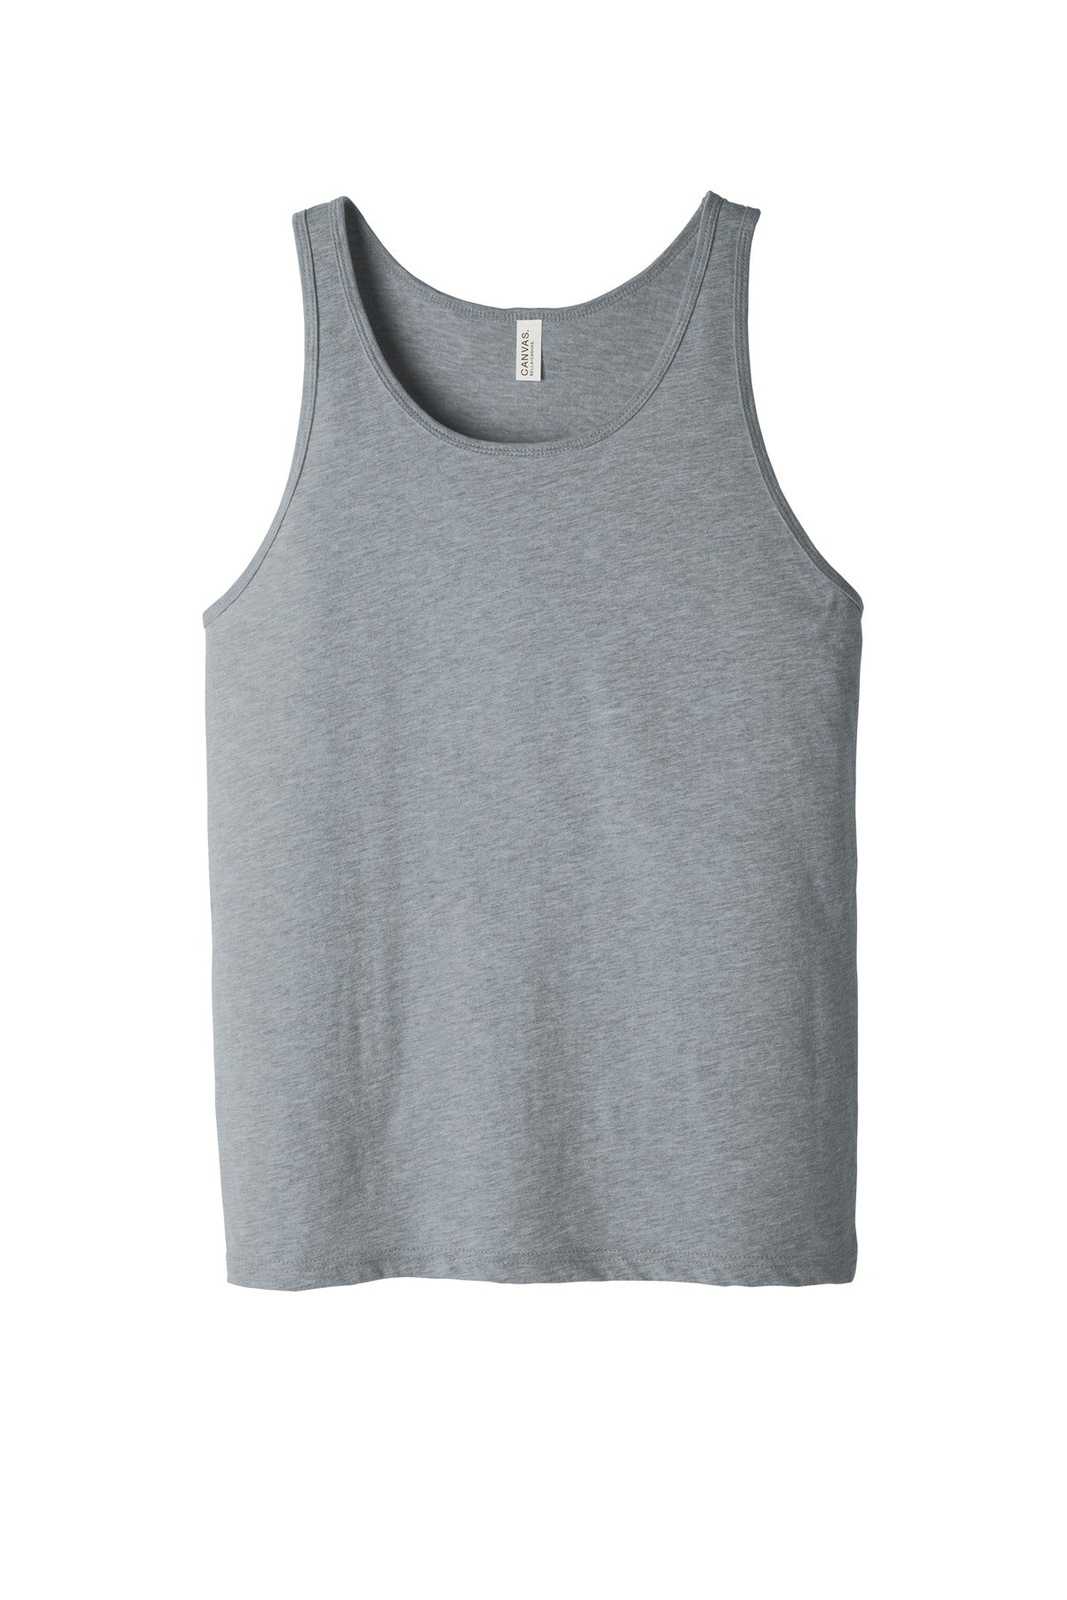 Bella + Canvas 3480 Unisex Jersey Tank - Athletic Heather - HIT a Double